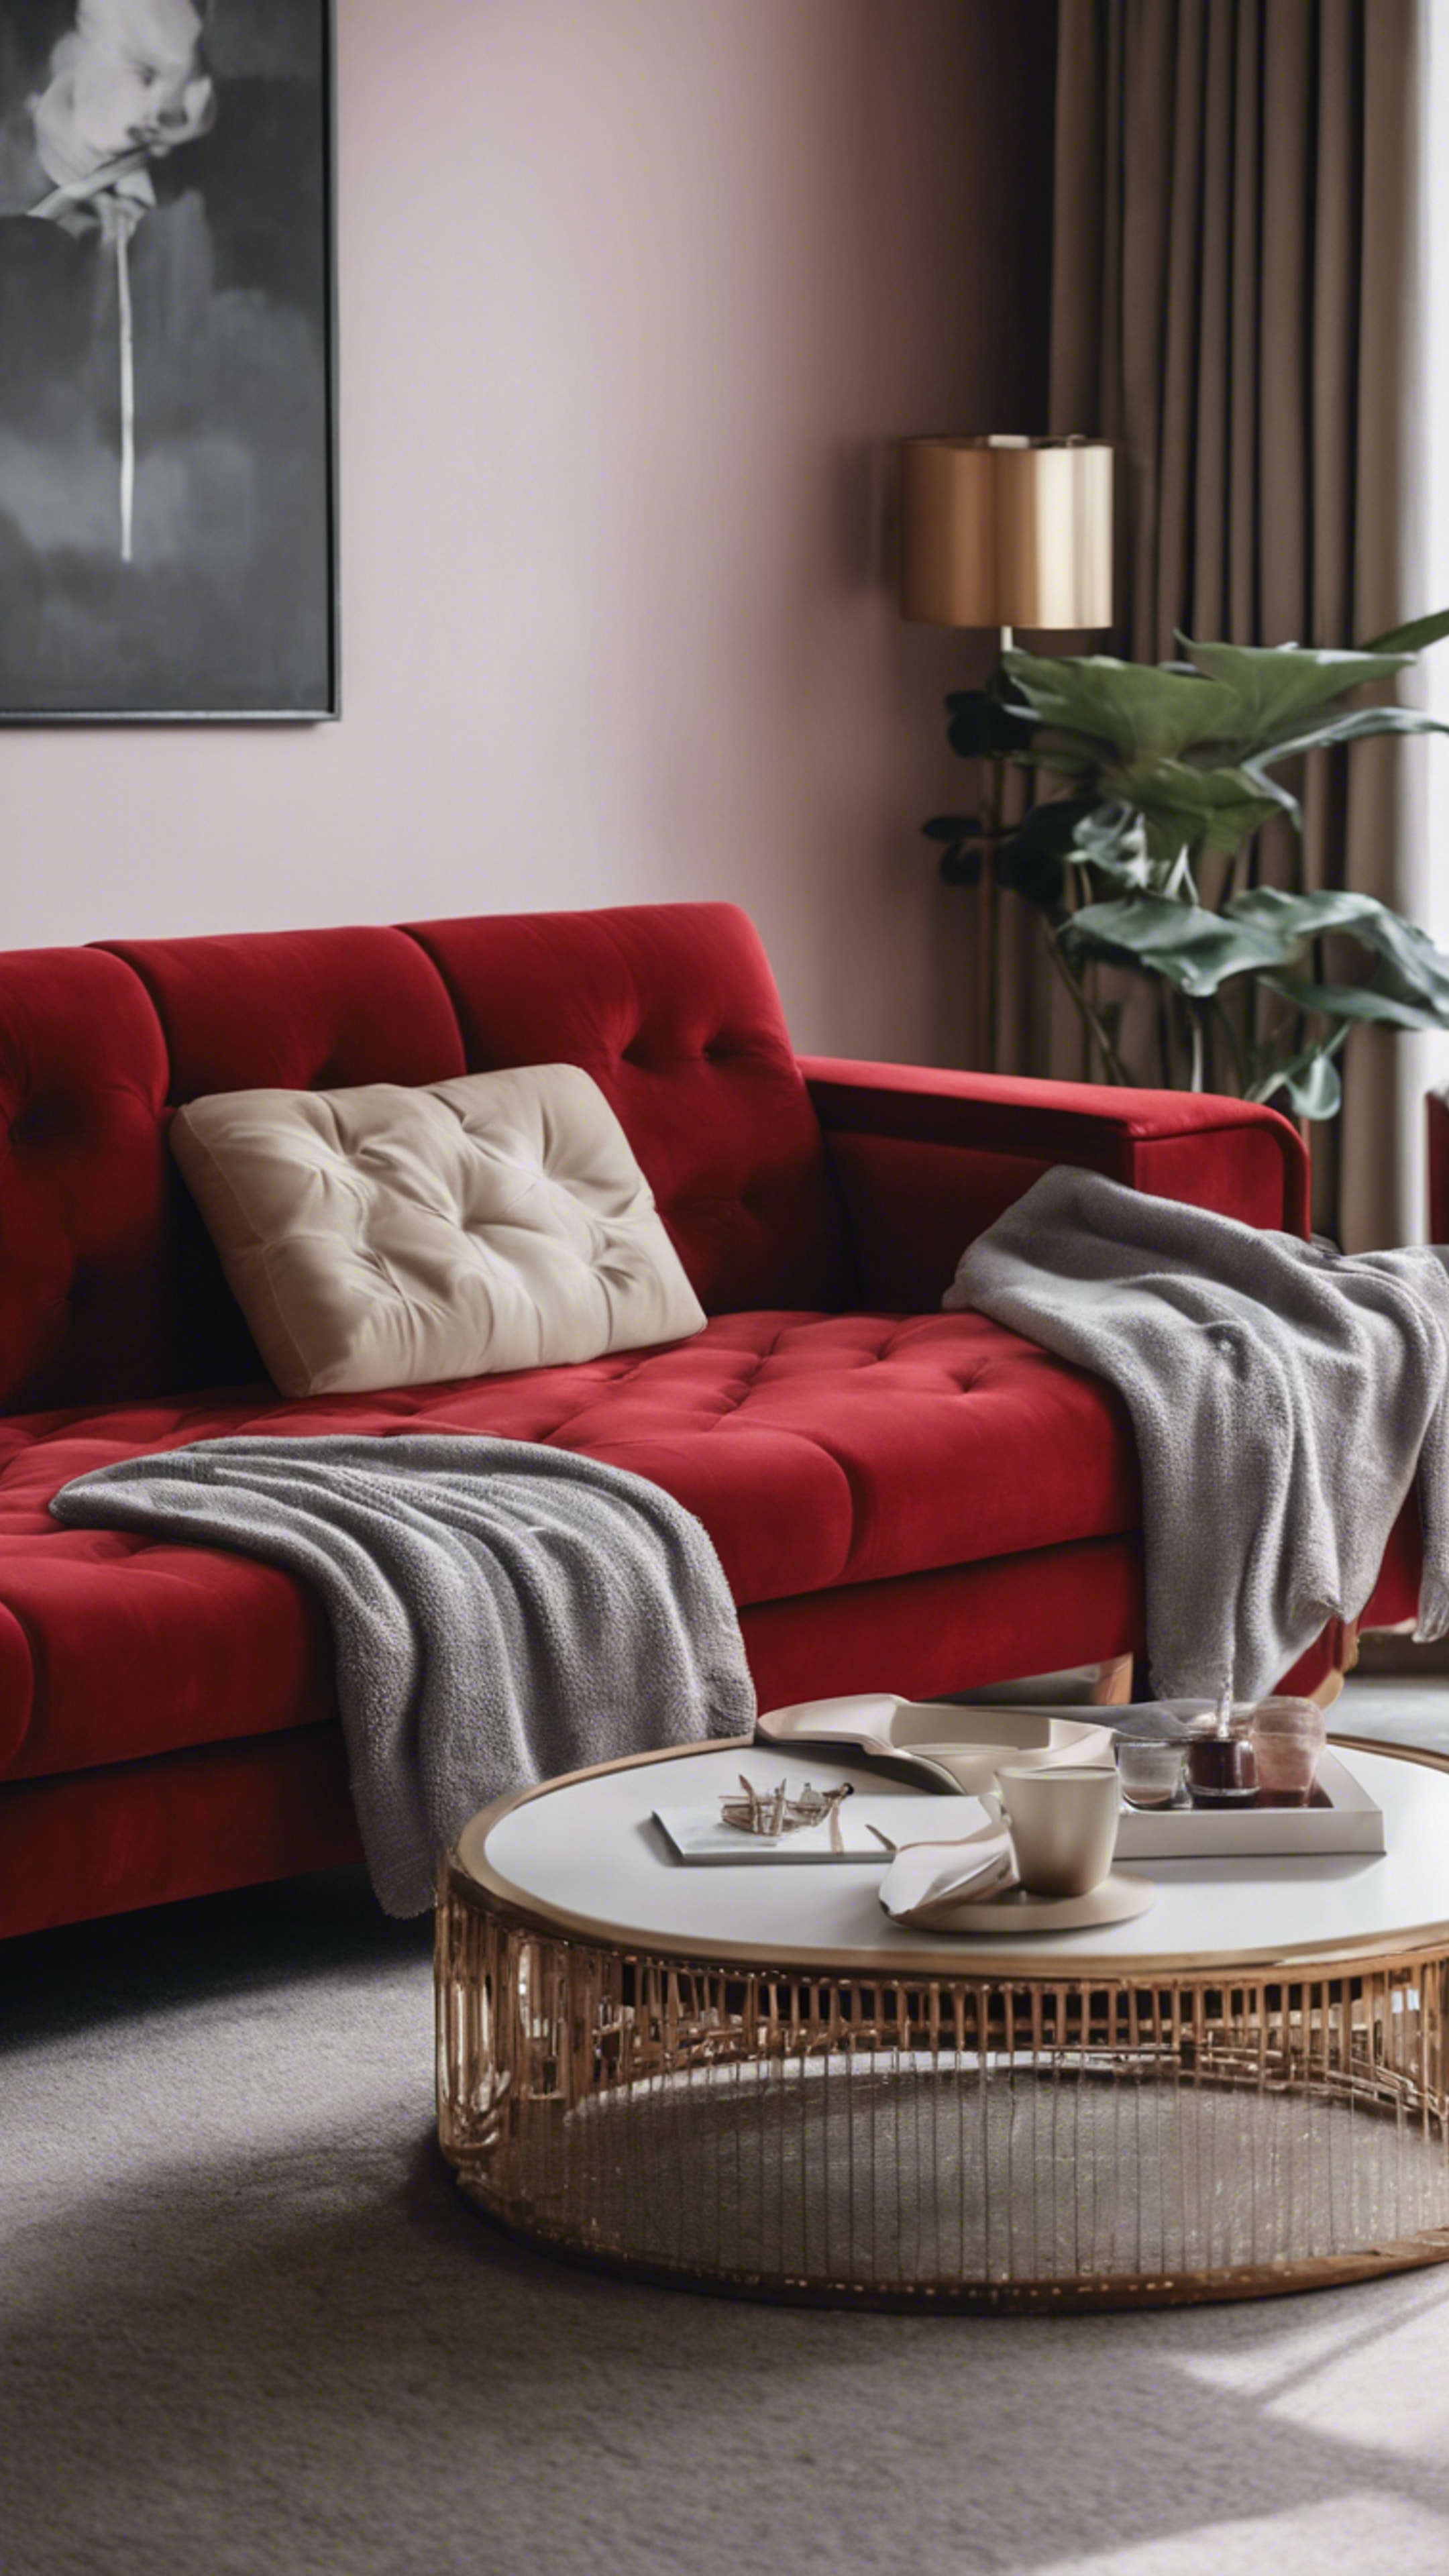 A luxurious red velvet sofa in a minimalistic modern living room, its color standing out in an otherwise neutral scene. Tapet[9f5c54c2b7d04d069b86]